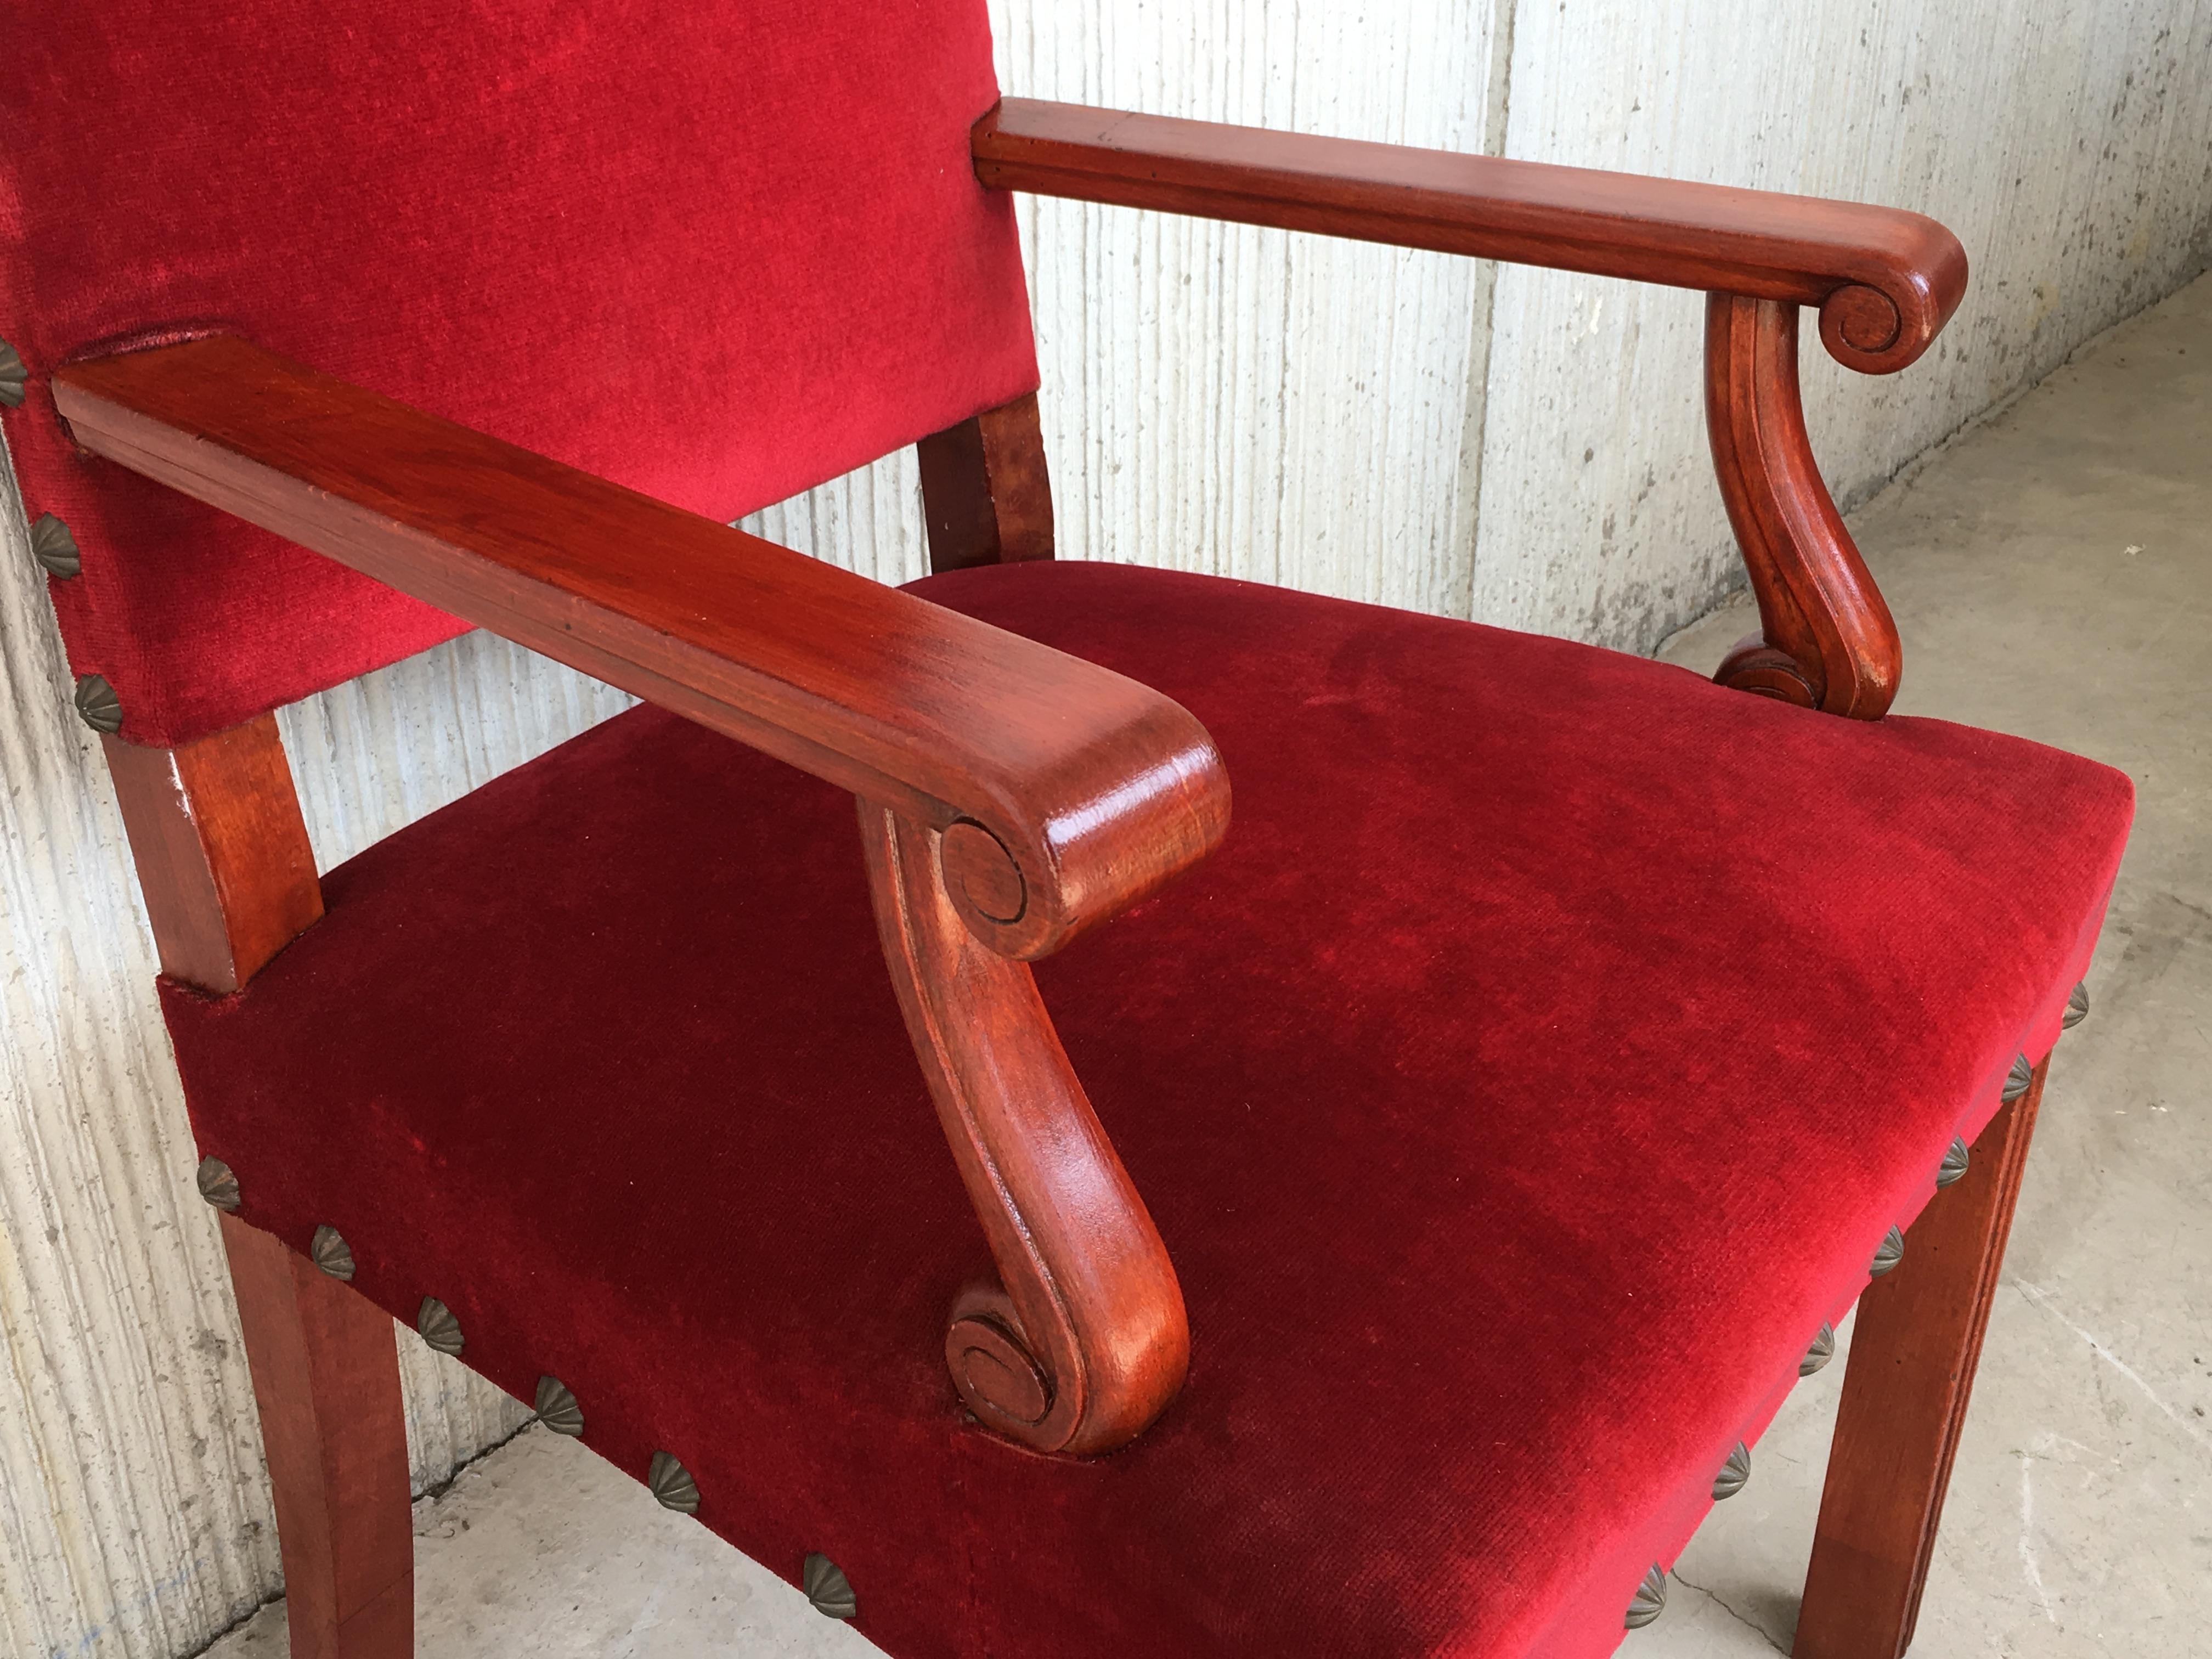 19th Century Spanish Revival High Back Armchair with Red Velvet Upholstery For Sale 3